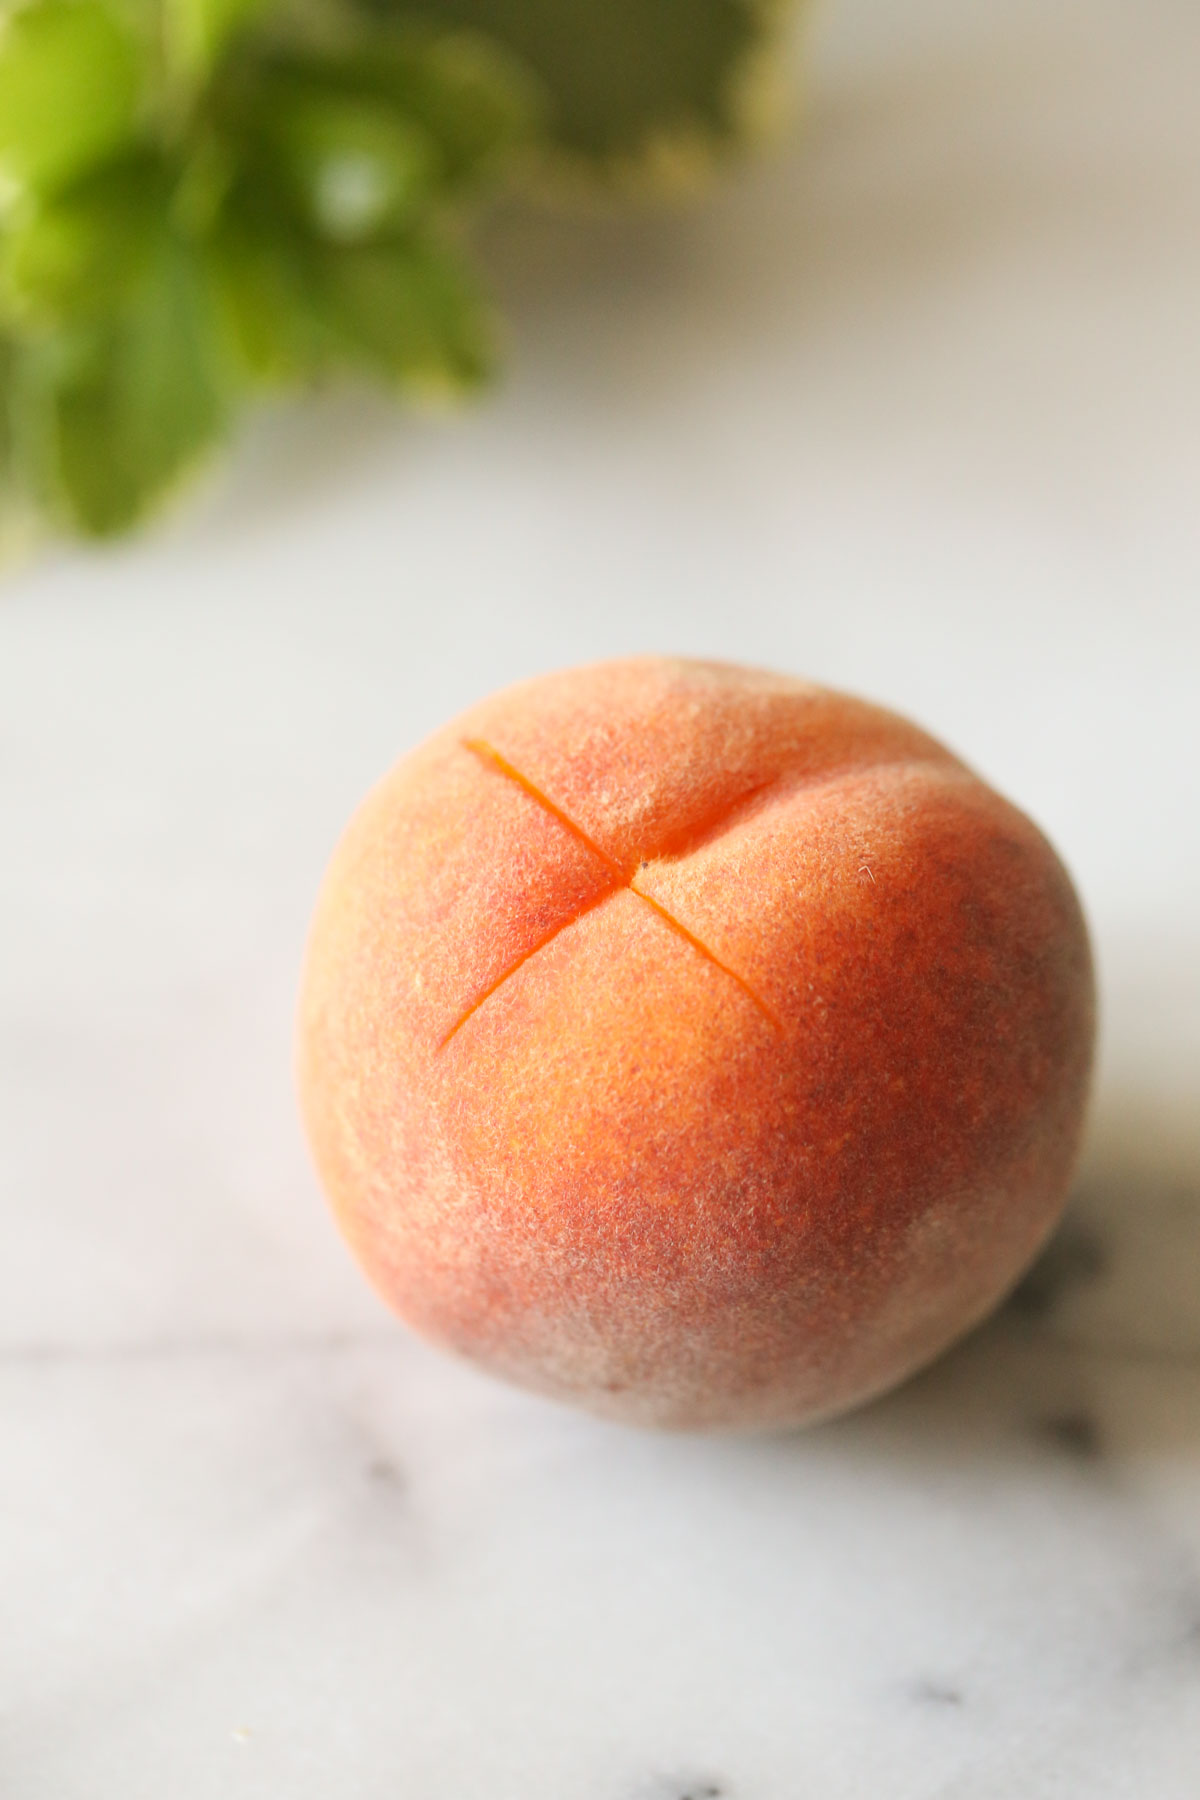 Close up shot of a peach with an "X" cut into the bottom of it.  